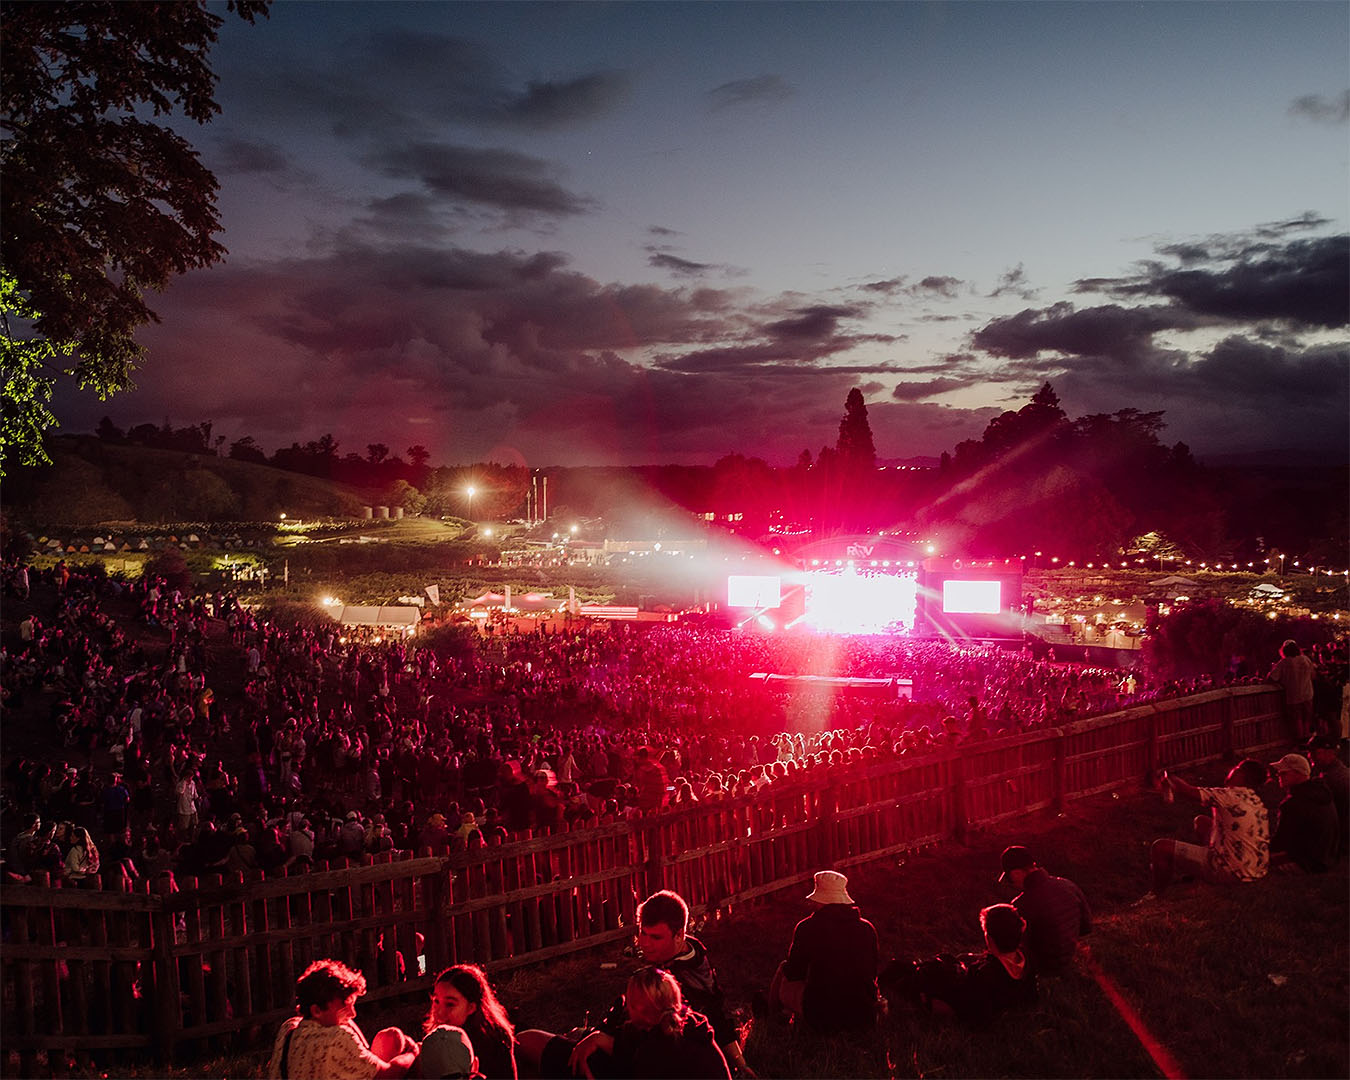 Festival goers at Rhythm And Vines, one of the best music festivals in NZ.